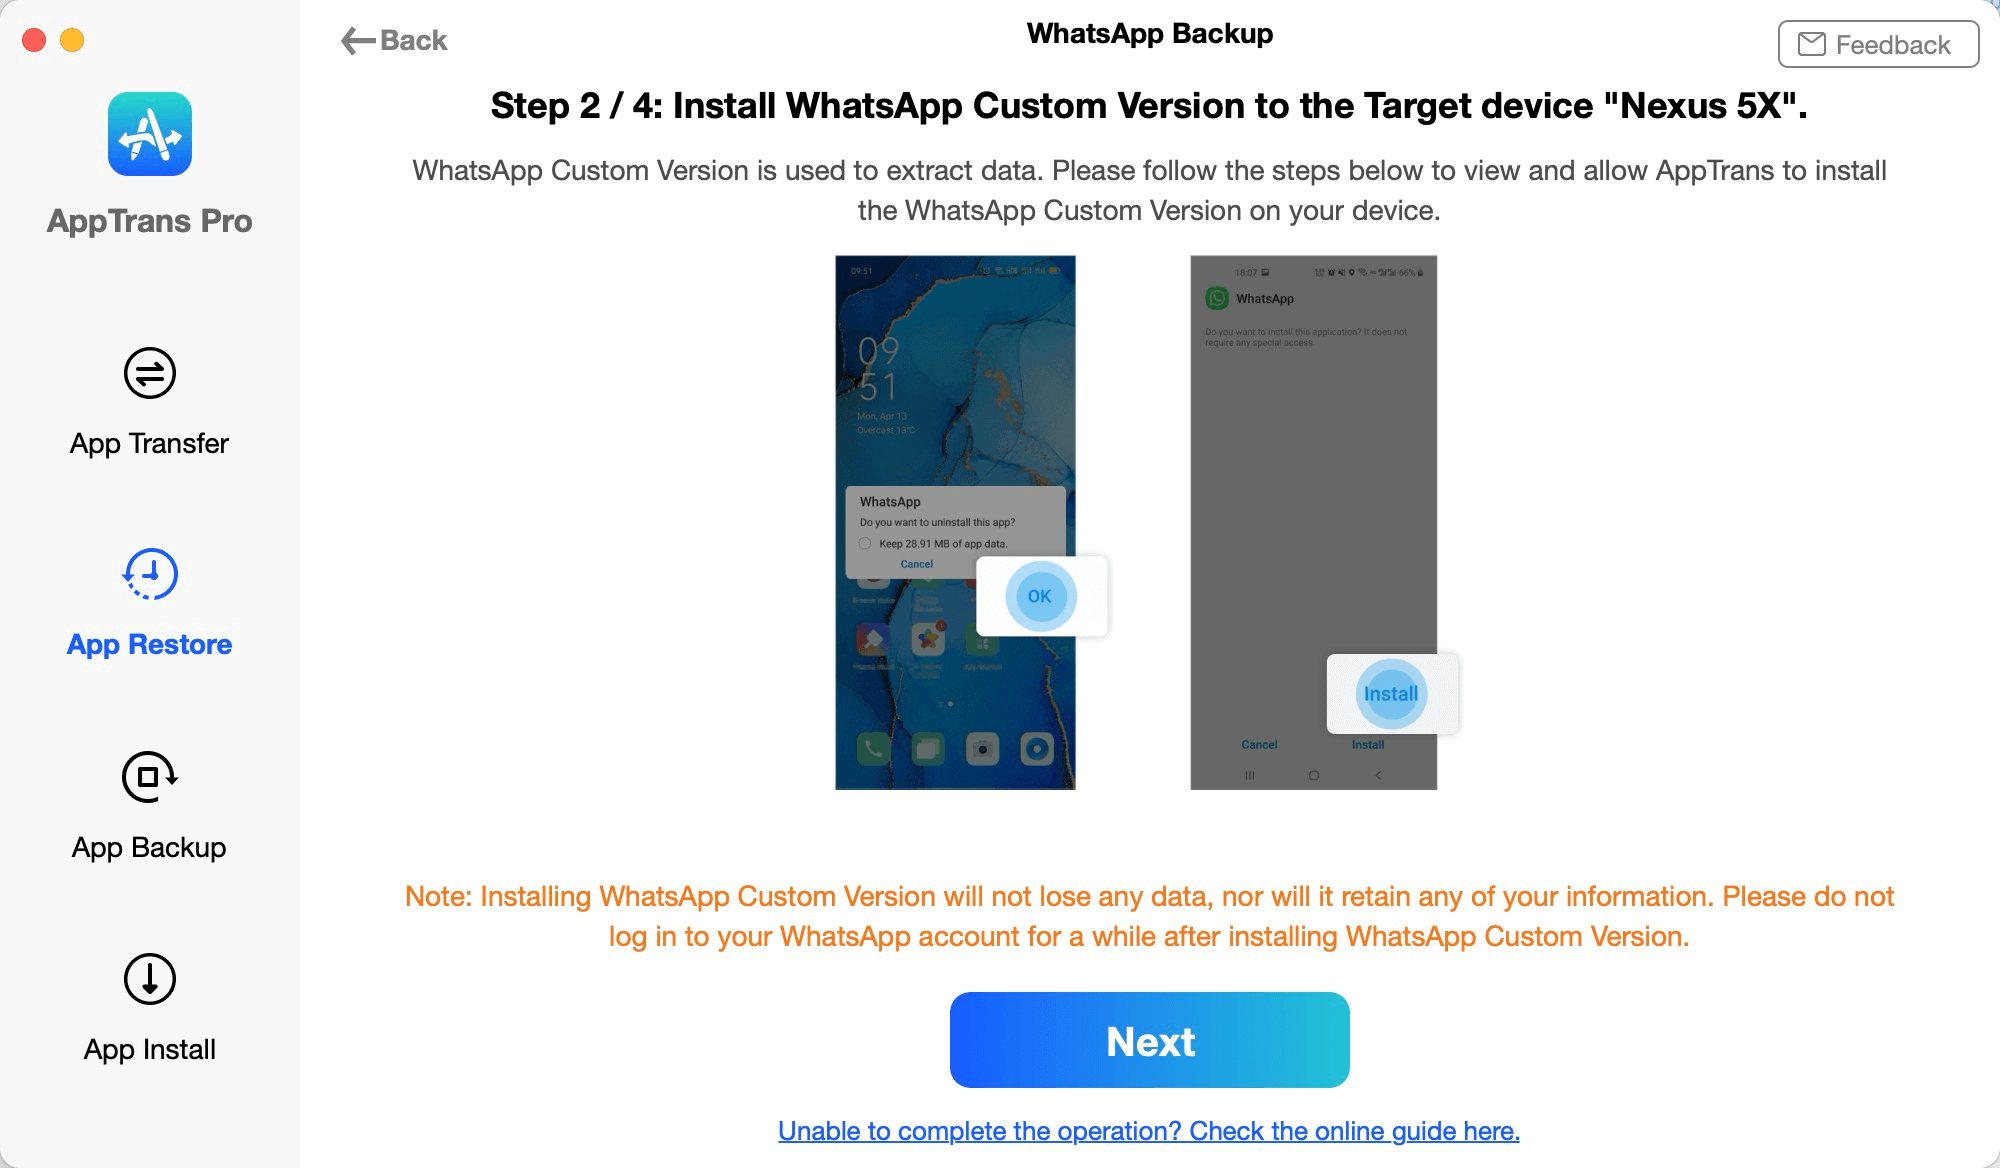 Install WhatsApp Custom Version to the Target Device